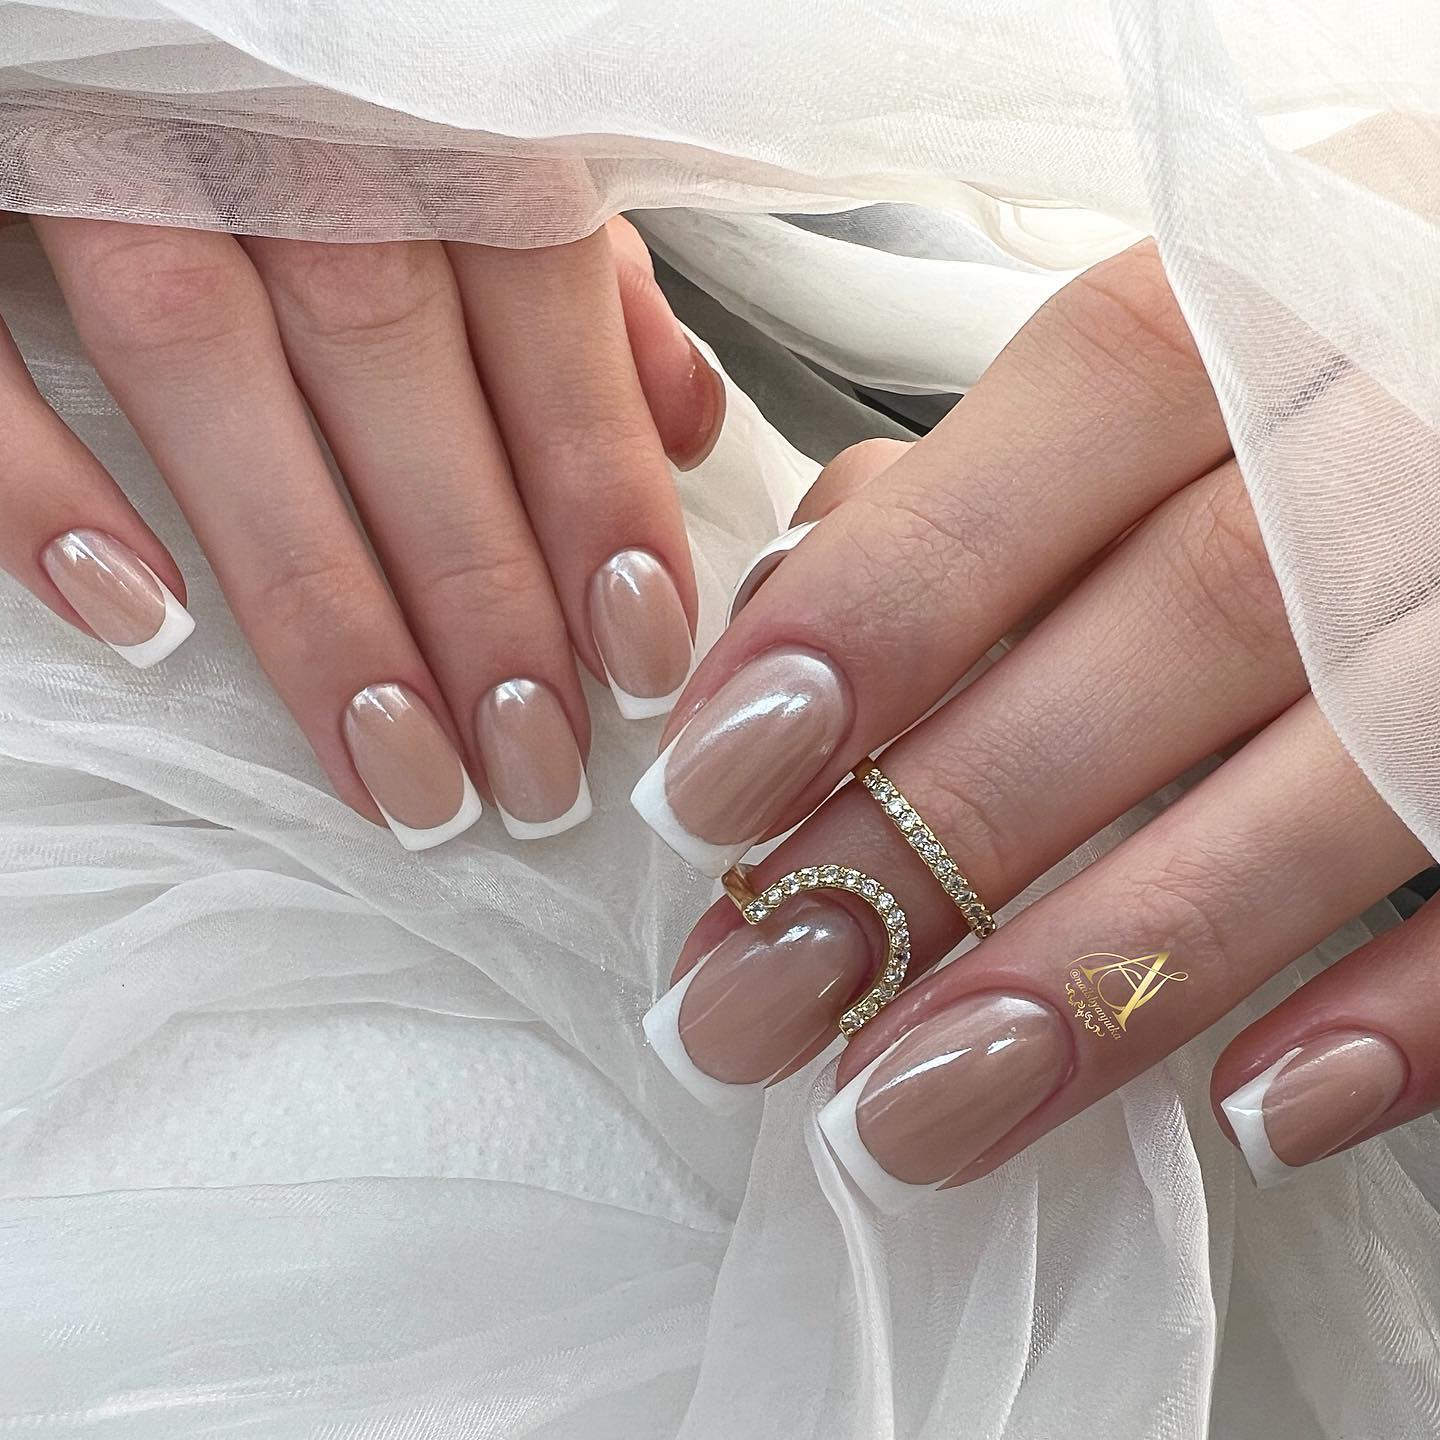 French Manicure with Shiny Top Coat